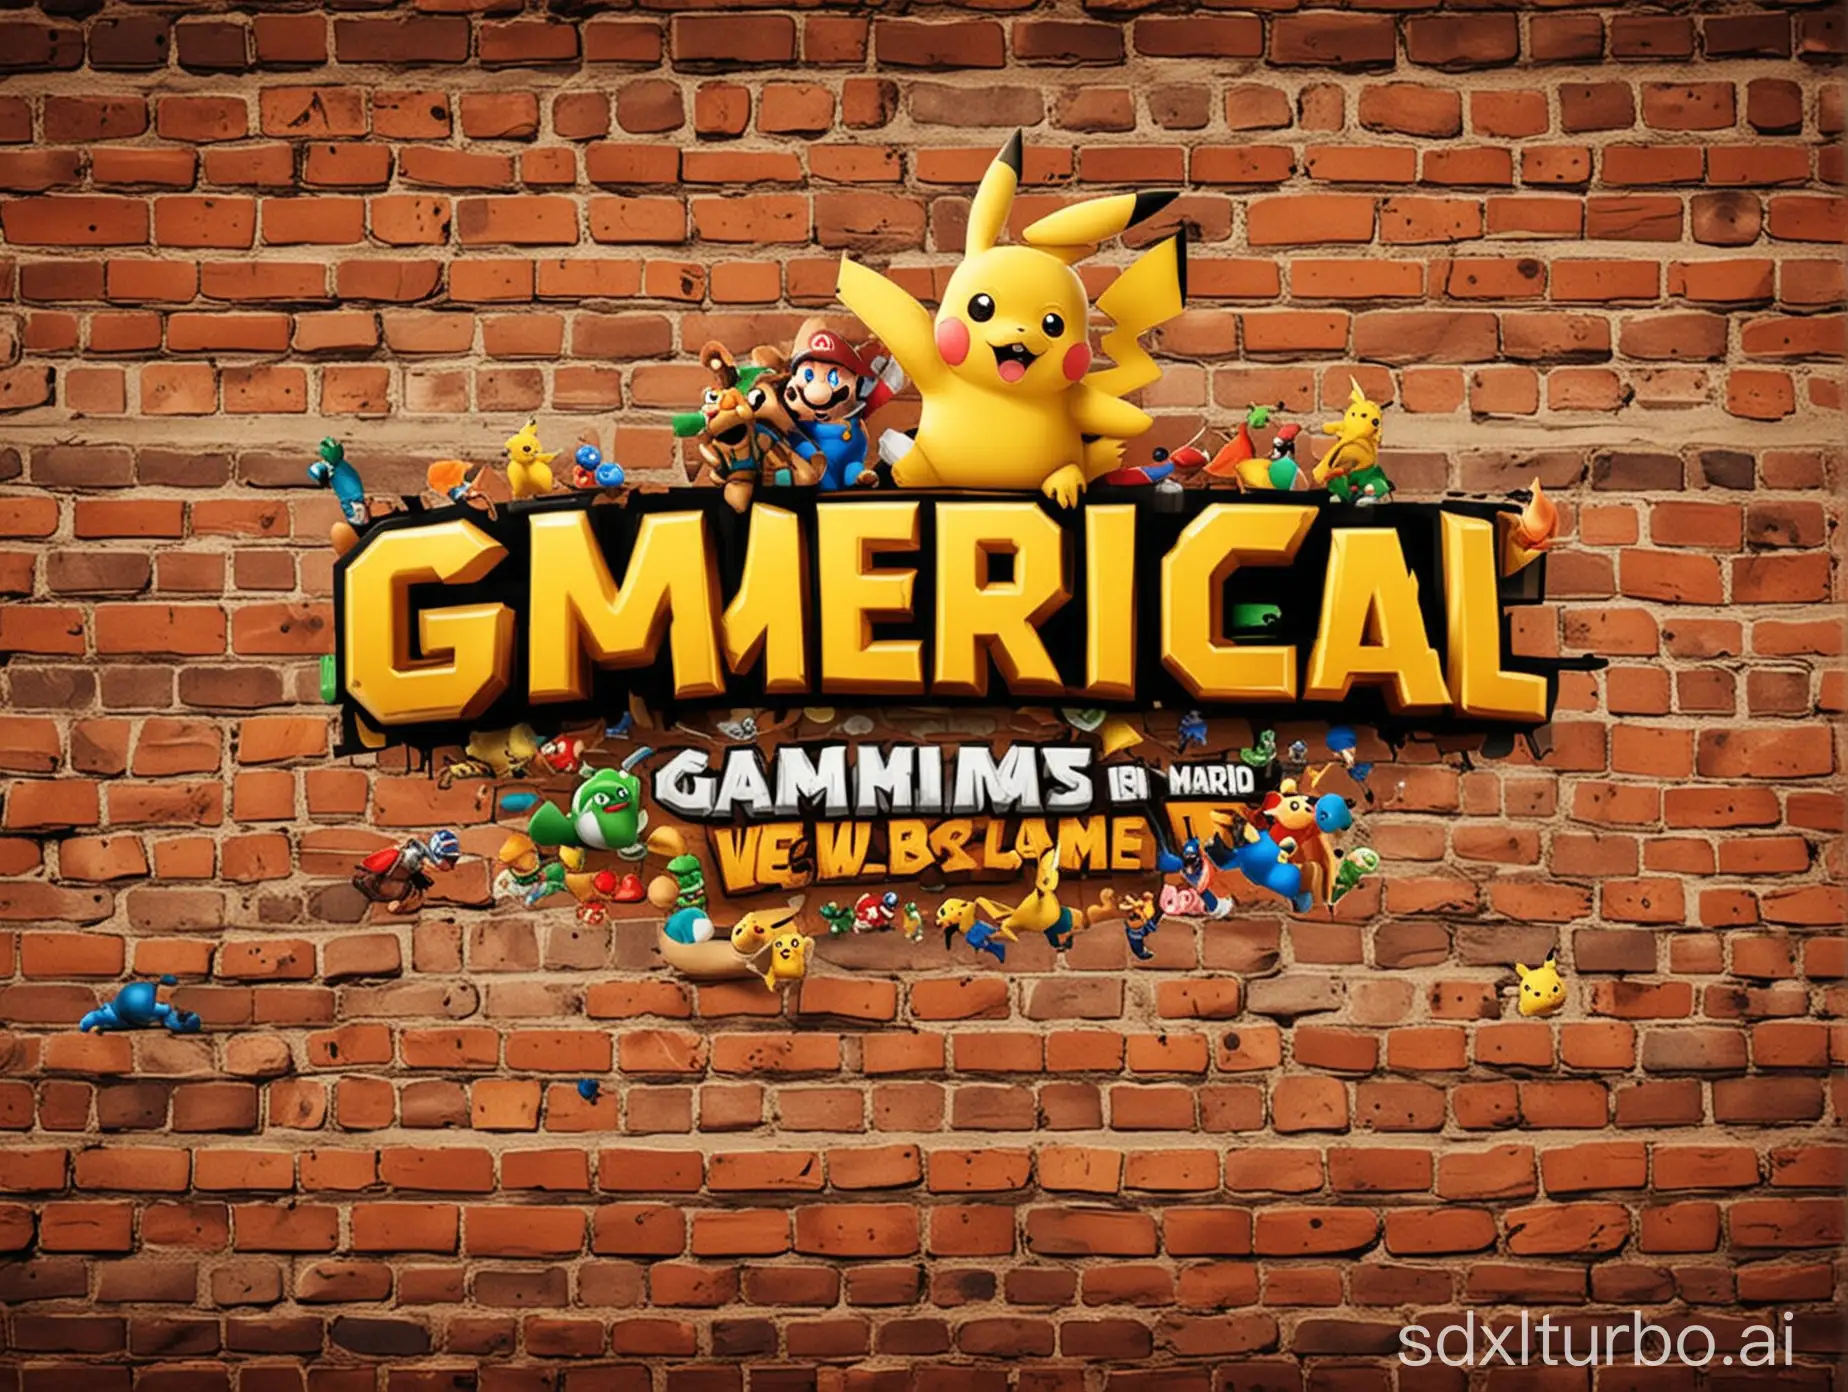 "Produce a banner for the HTML5 gaming website, Gamerical, featuring popular characters like Super Mario, Pikachu, and Pacman. Craft an engaging scene where these iconic figures interact within a vibrant gaming environment, highlighting the diverse array of games available on the platform. Ensure the text reads 'Gamerical' without any variations to maintain consistency across all generated banners."